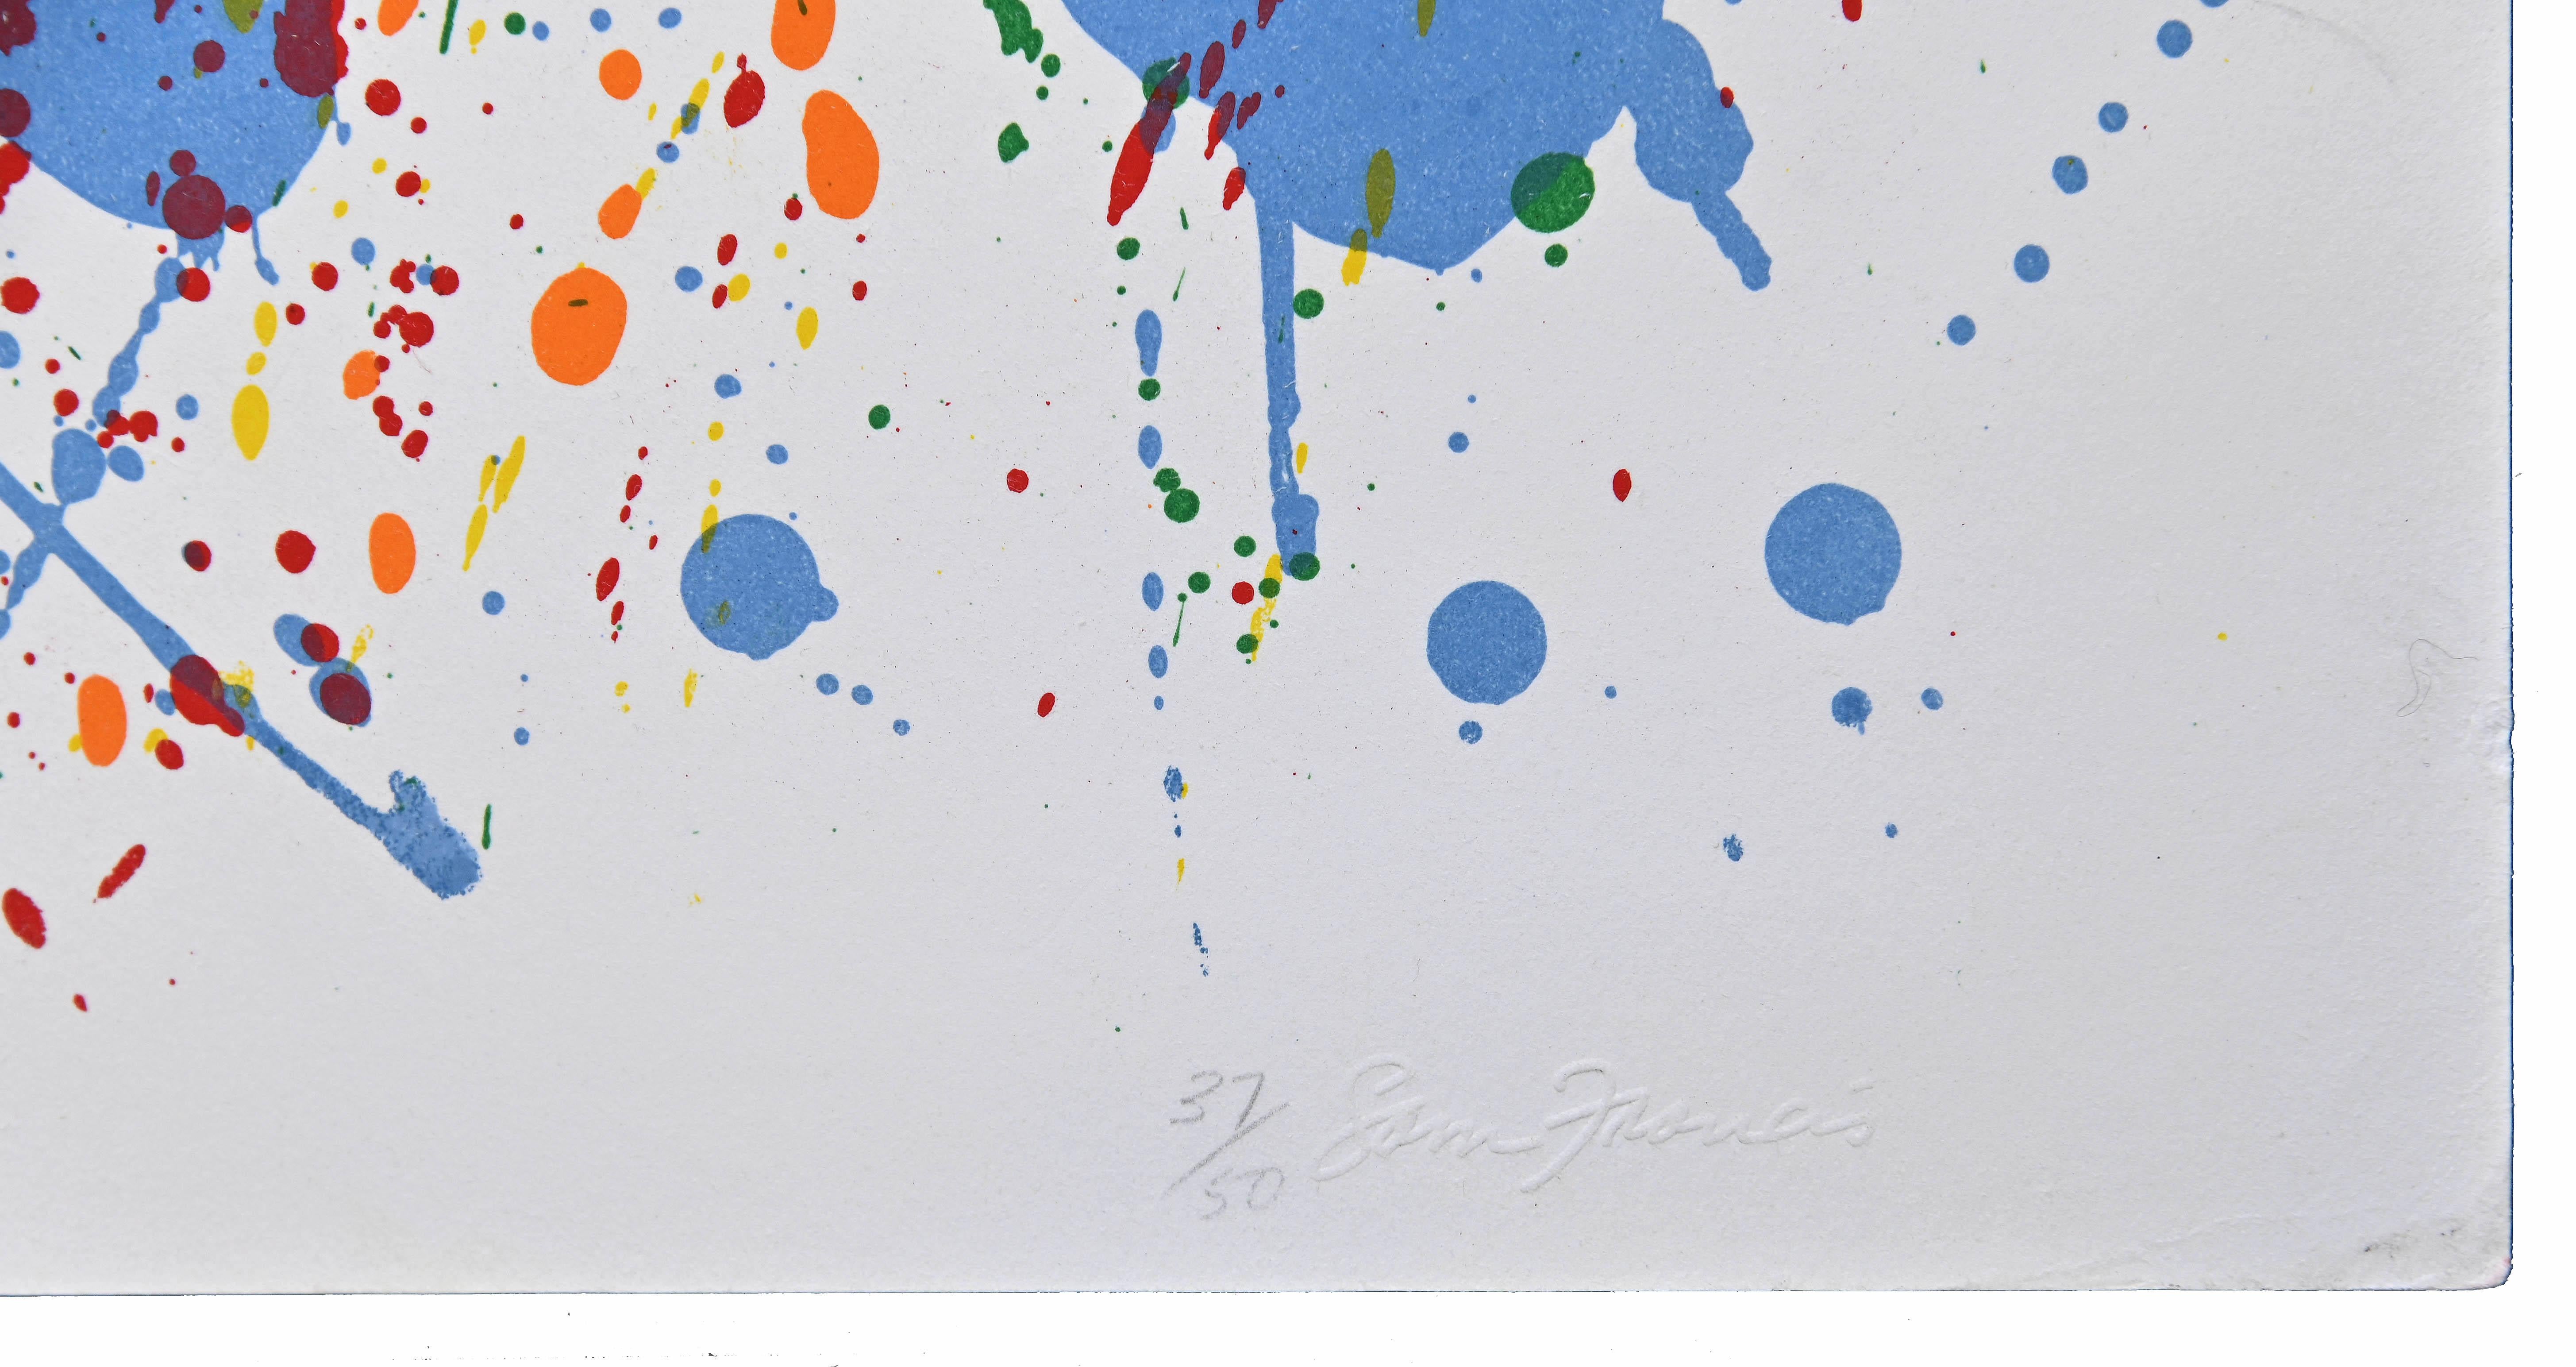 L'Etoile is an original artwork realized after Sam Francis in 1995.

Mixed colored lithograph, realized in nine colors a few months after his death.

Blindstamp of the artist's signature. Wet stamp of the Foundation Sam Francis on the